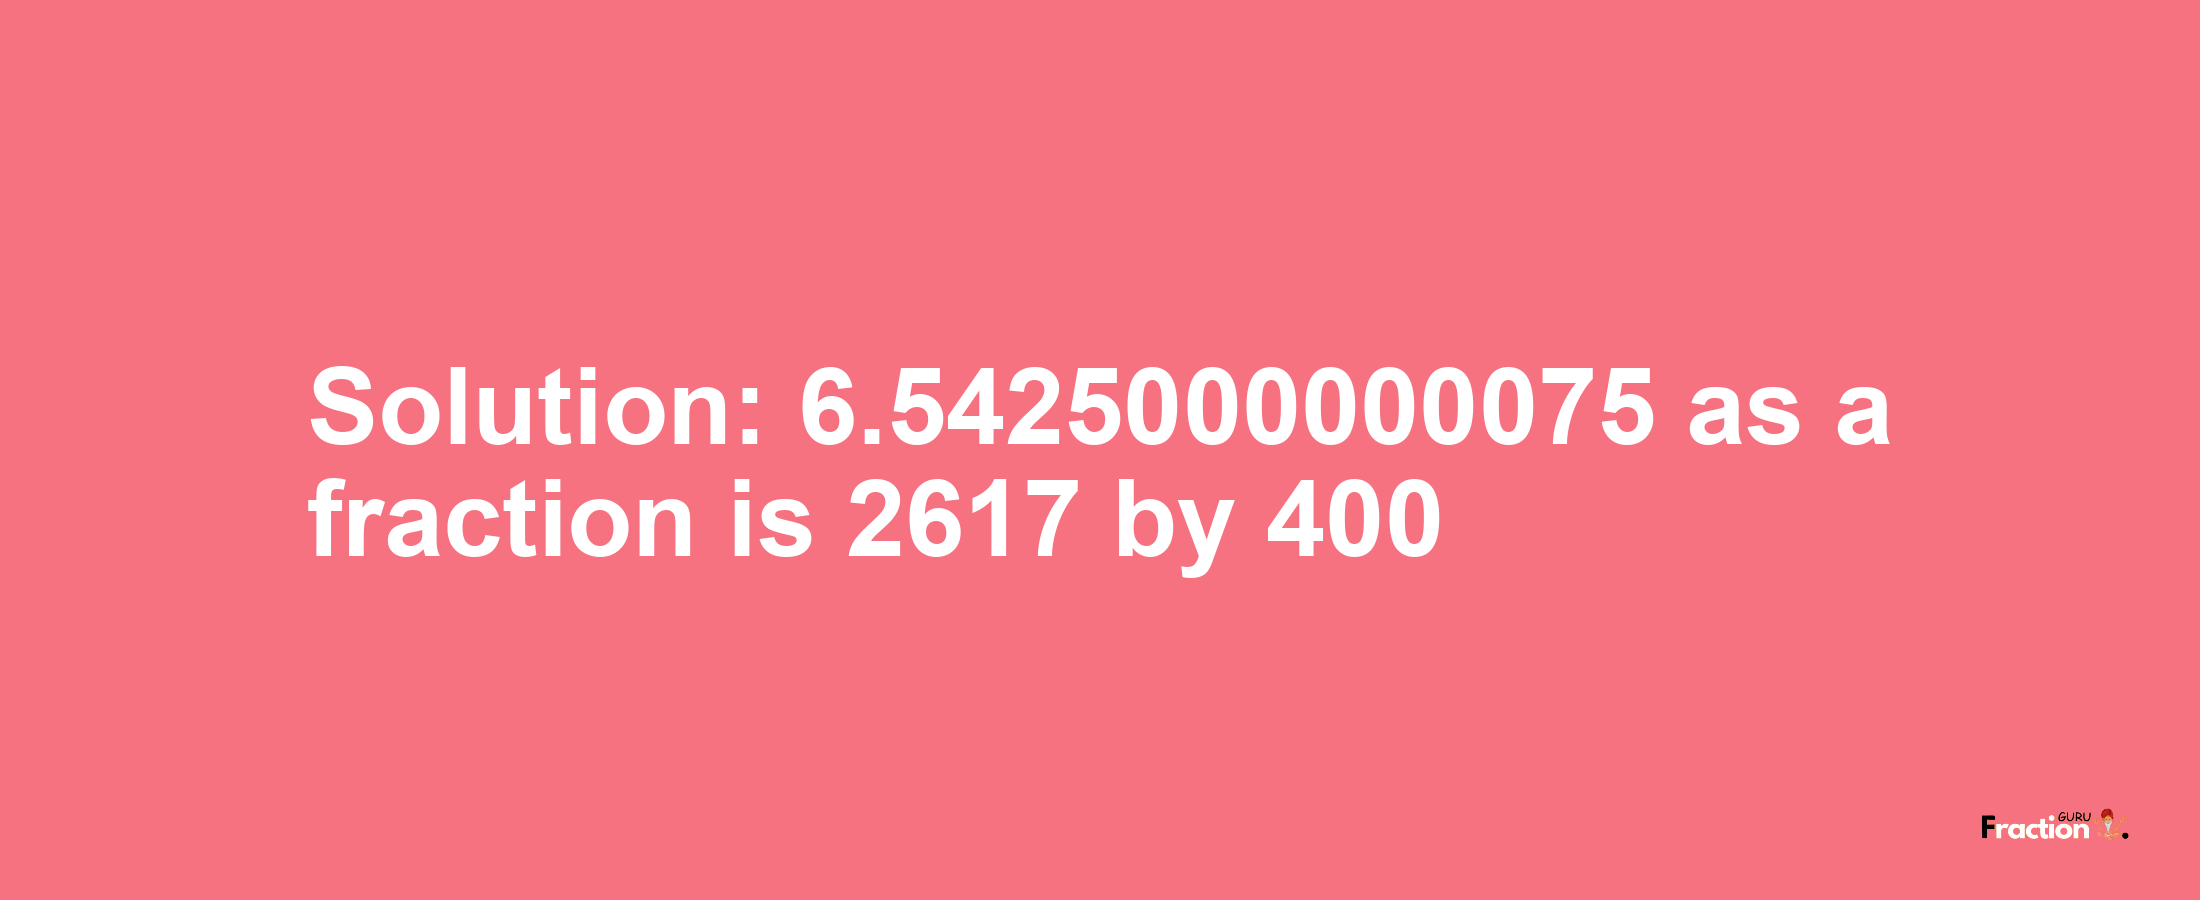 Solution:6.5425000000075 as a fraction is 2617/400